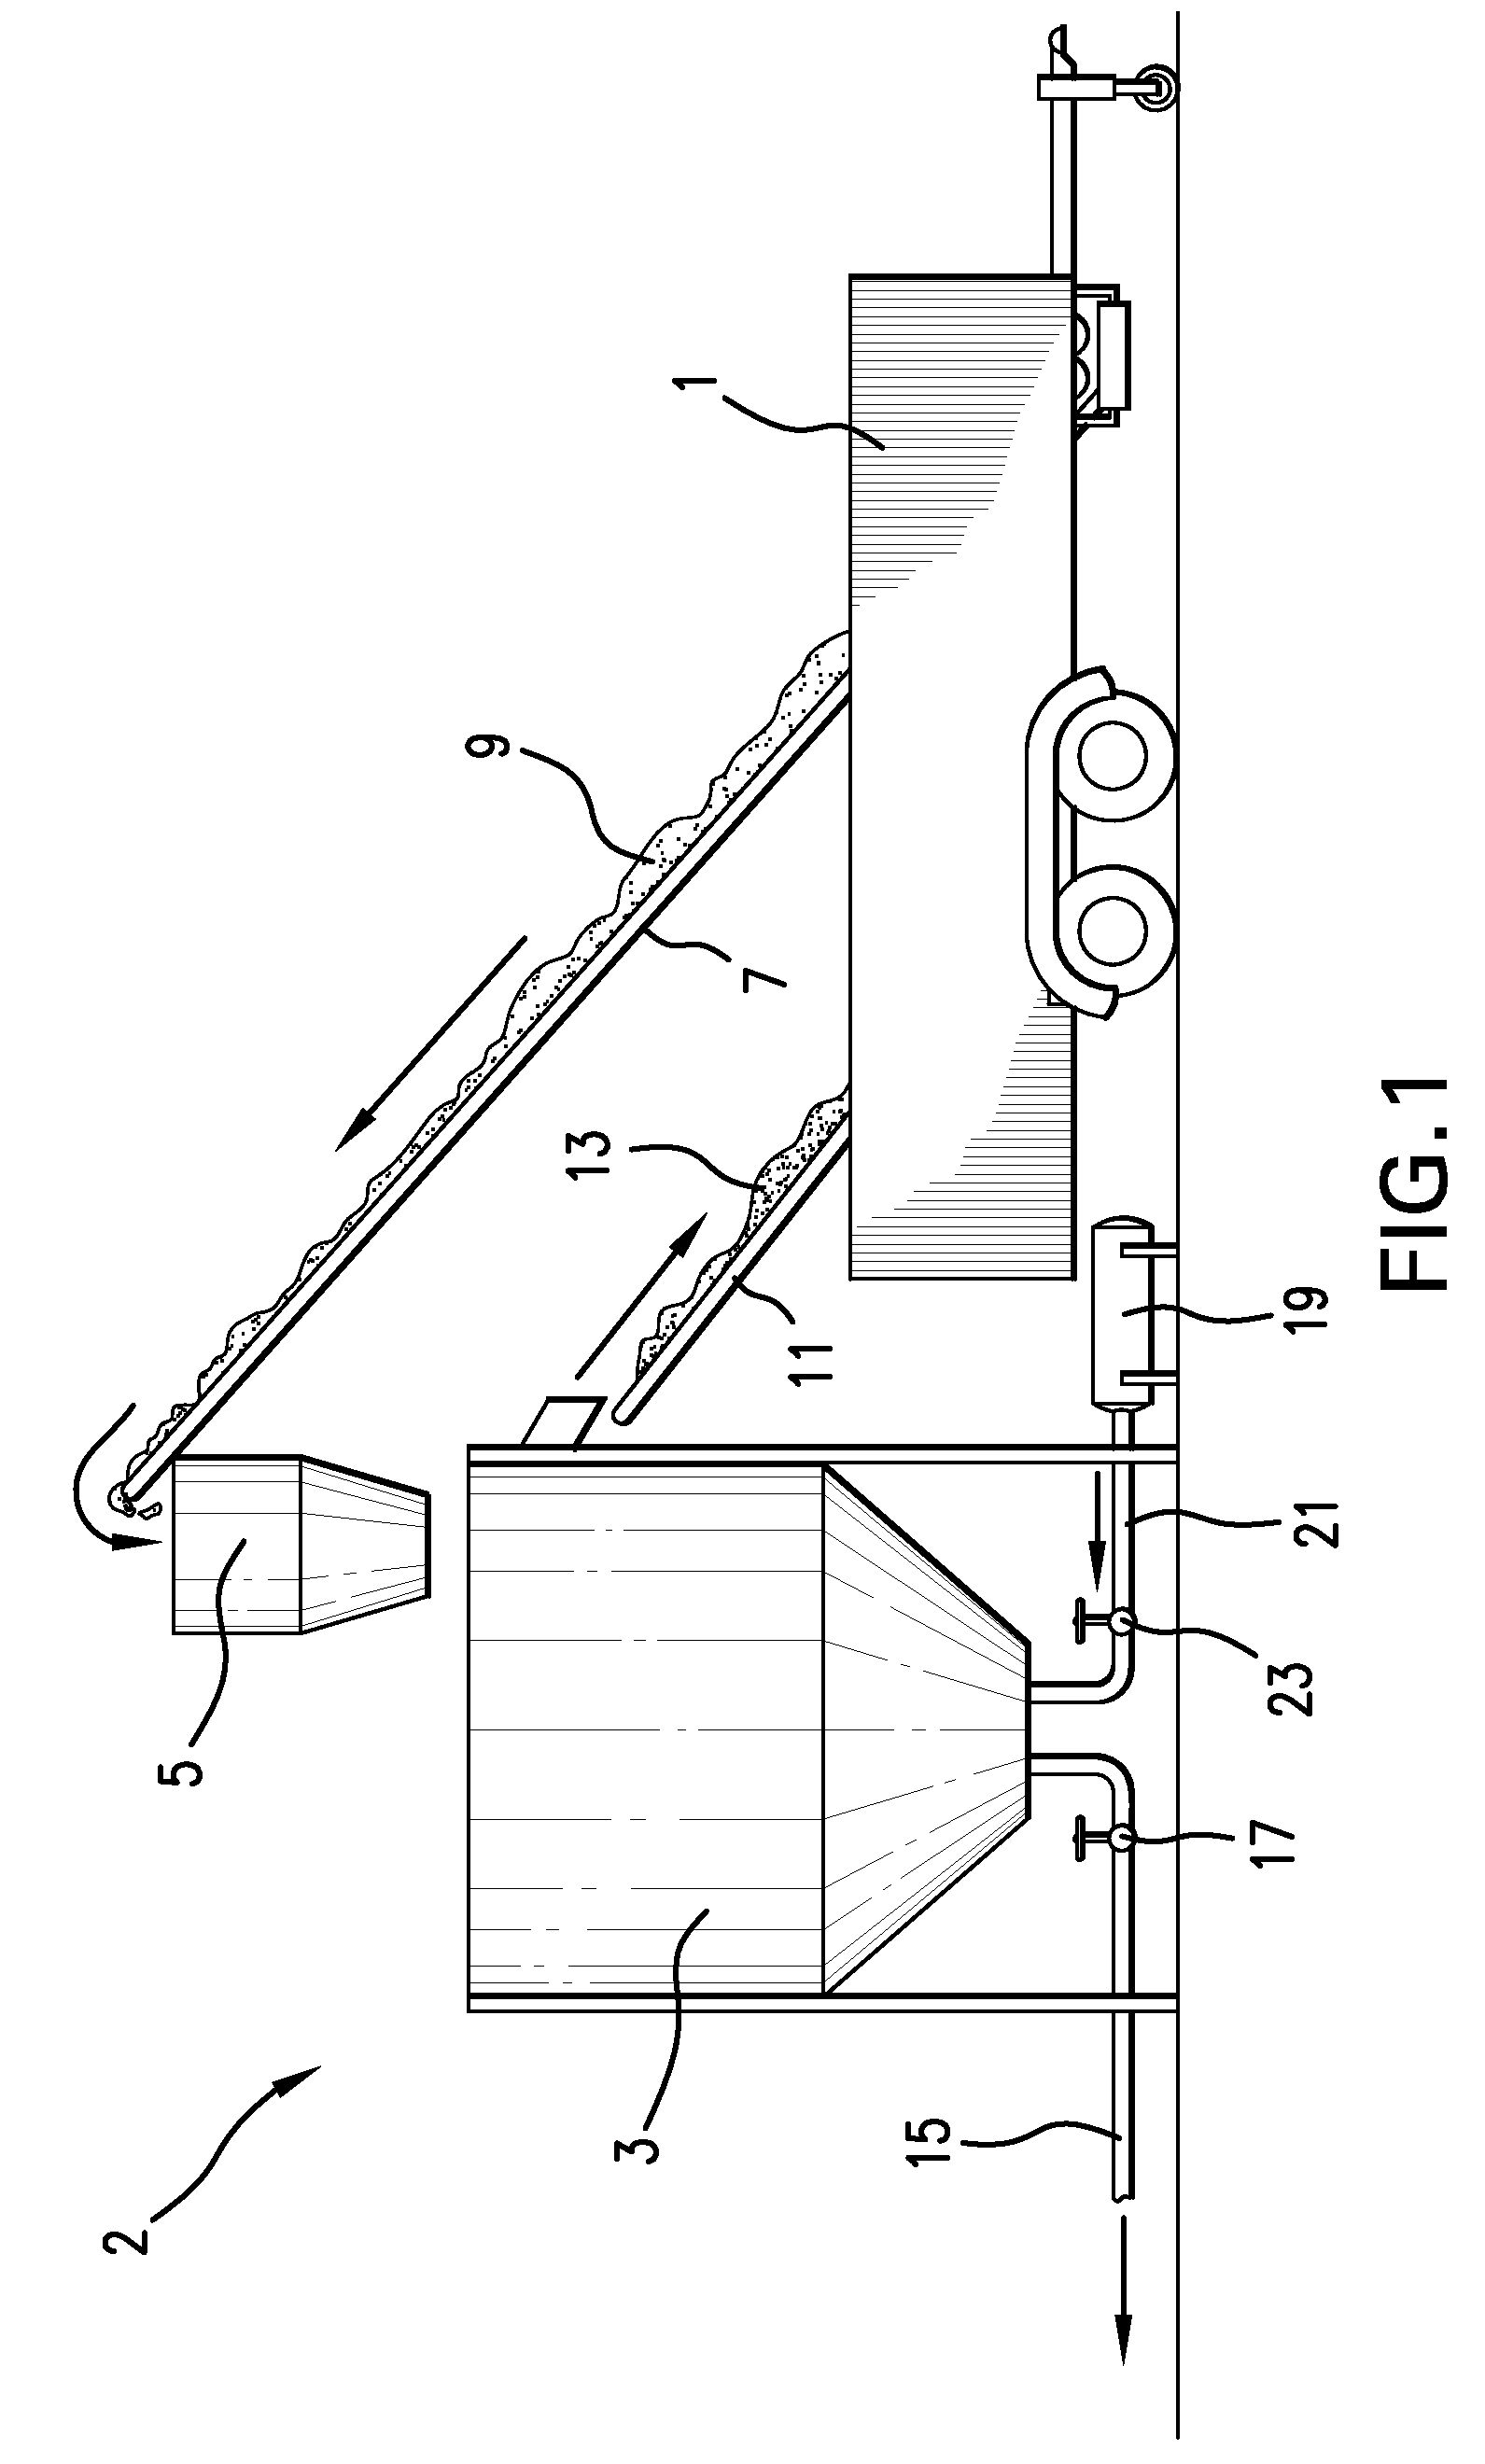 System and method for making liquid compost